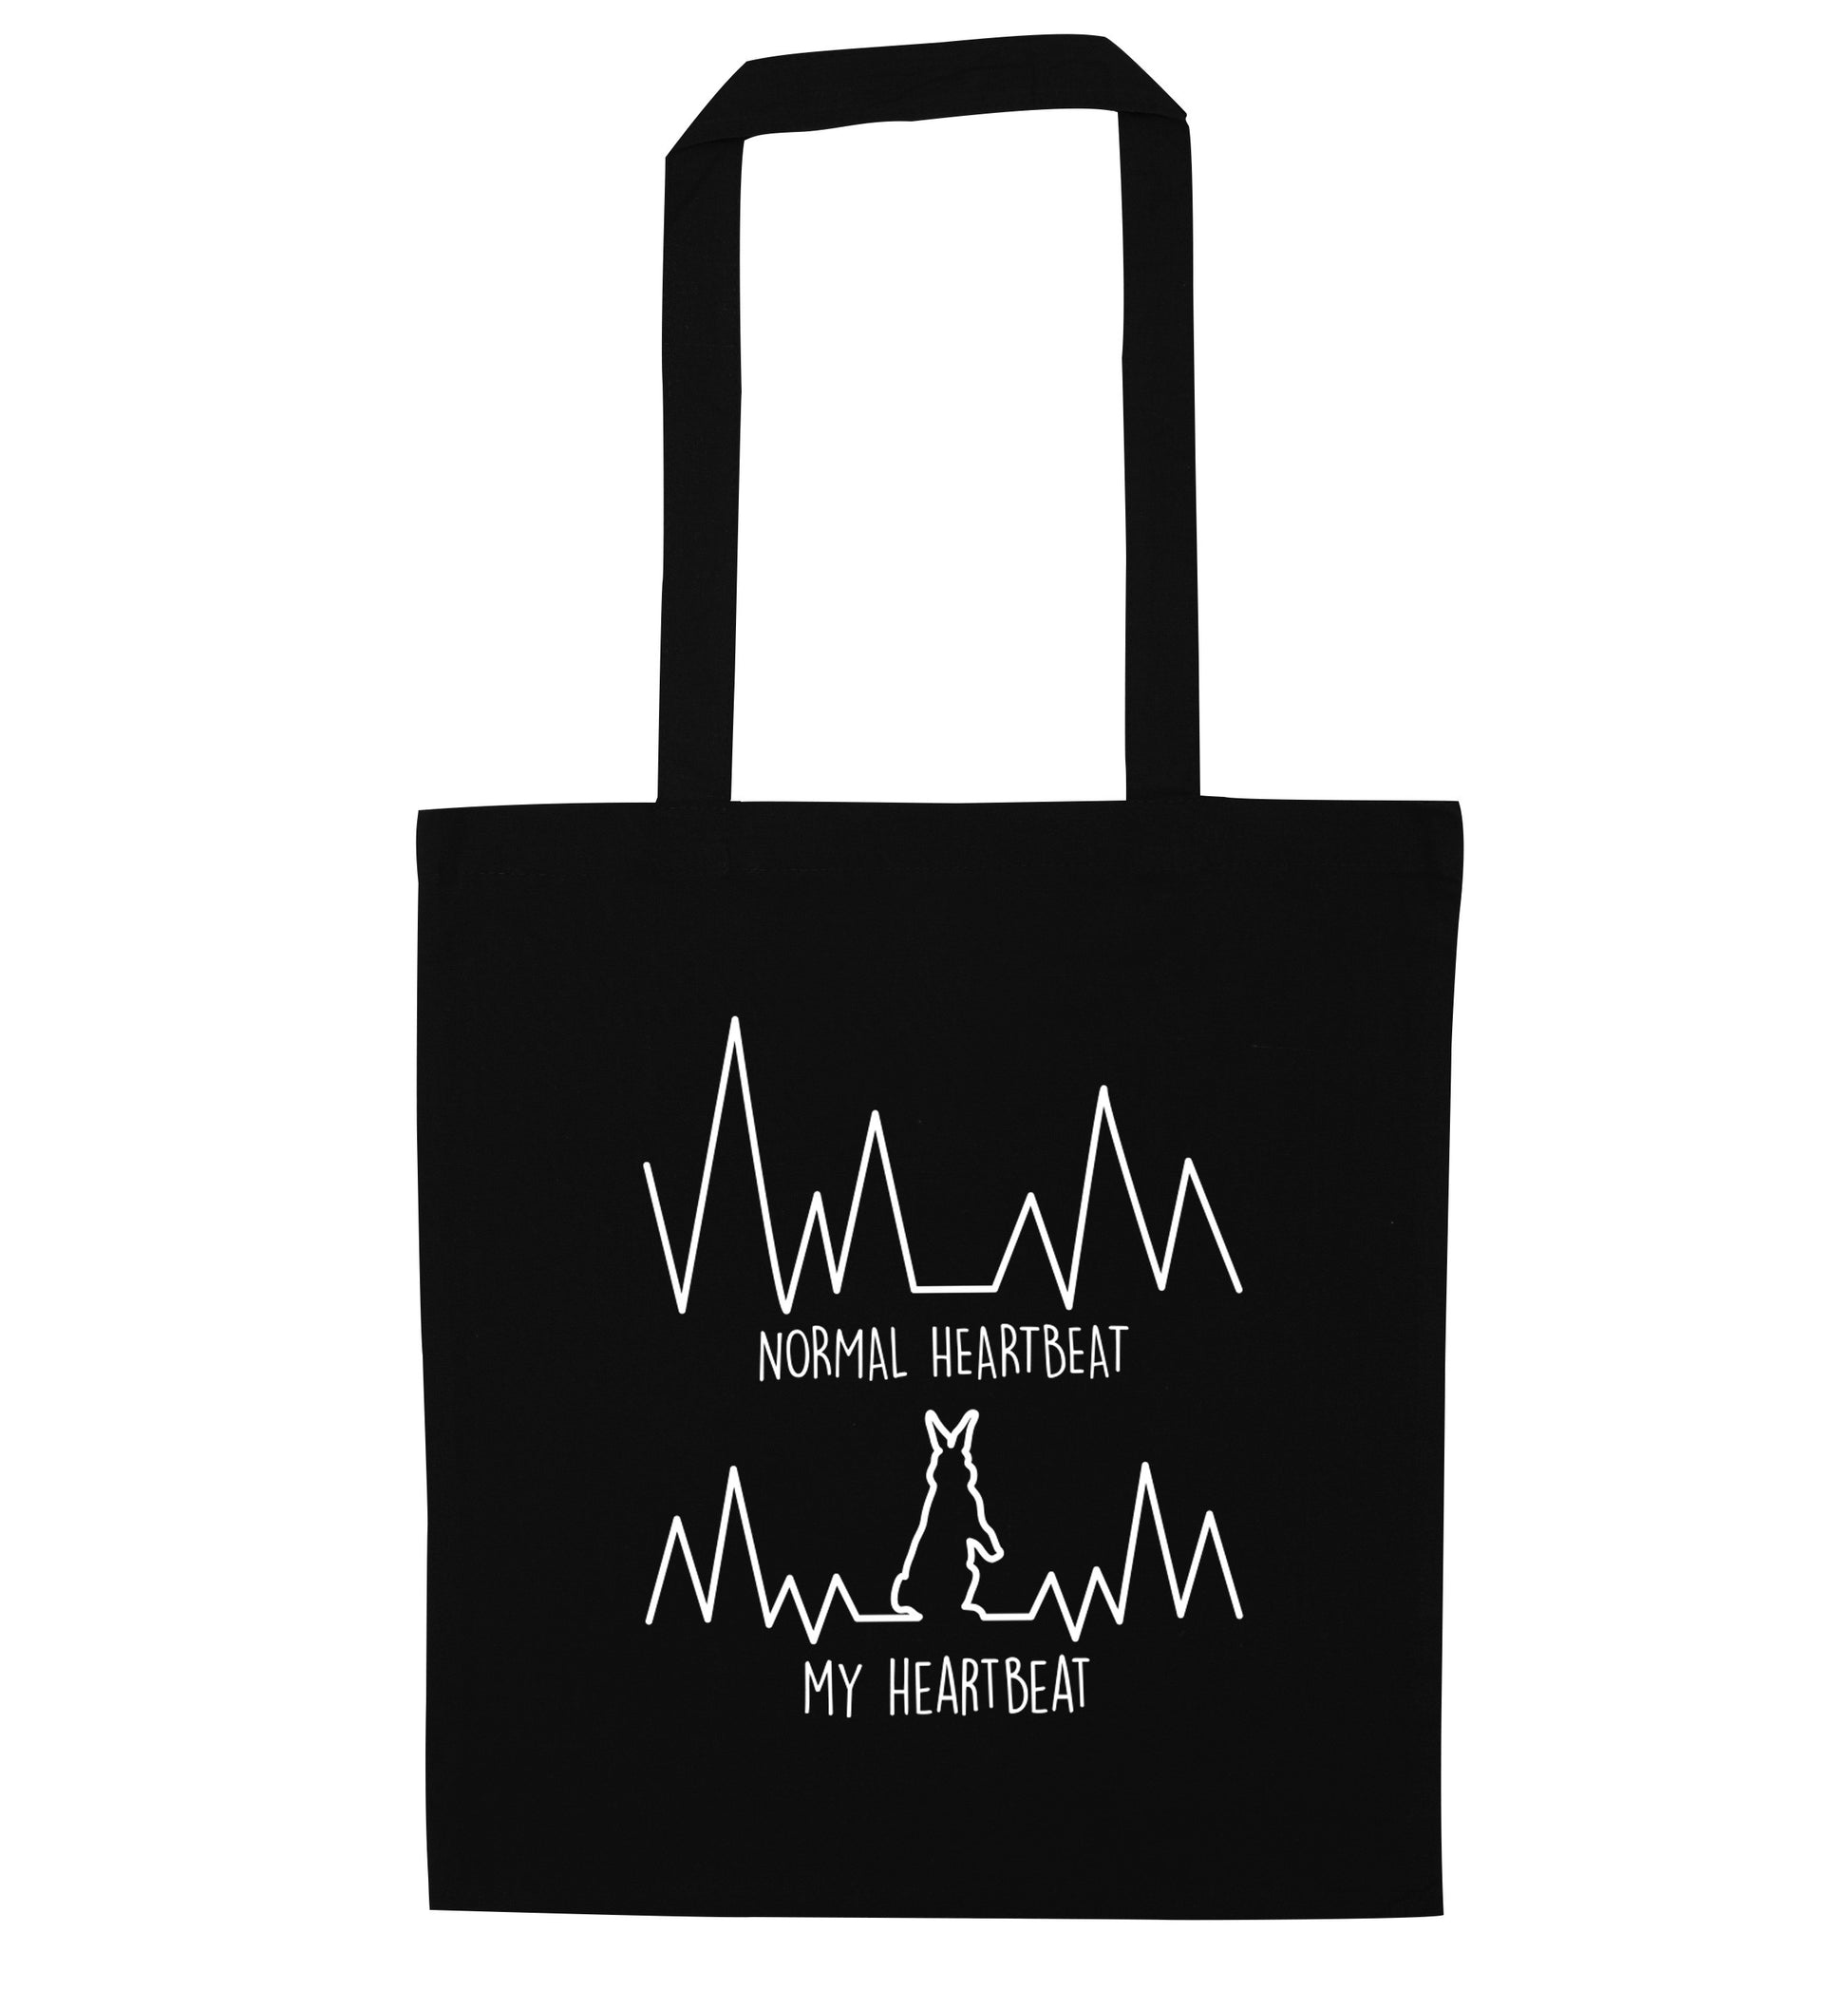 Normal heartbeat, my heartbeat rabbit lover black tote bag